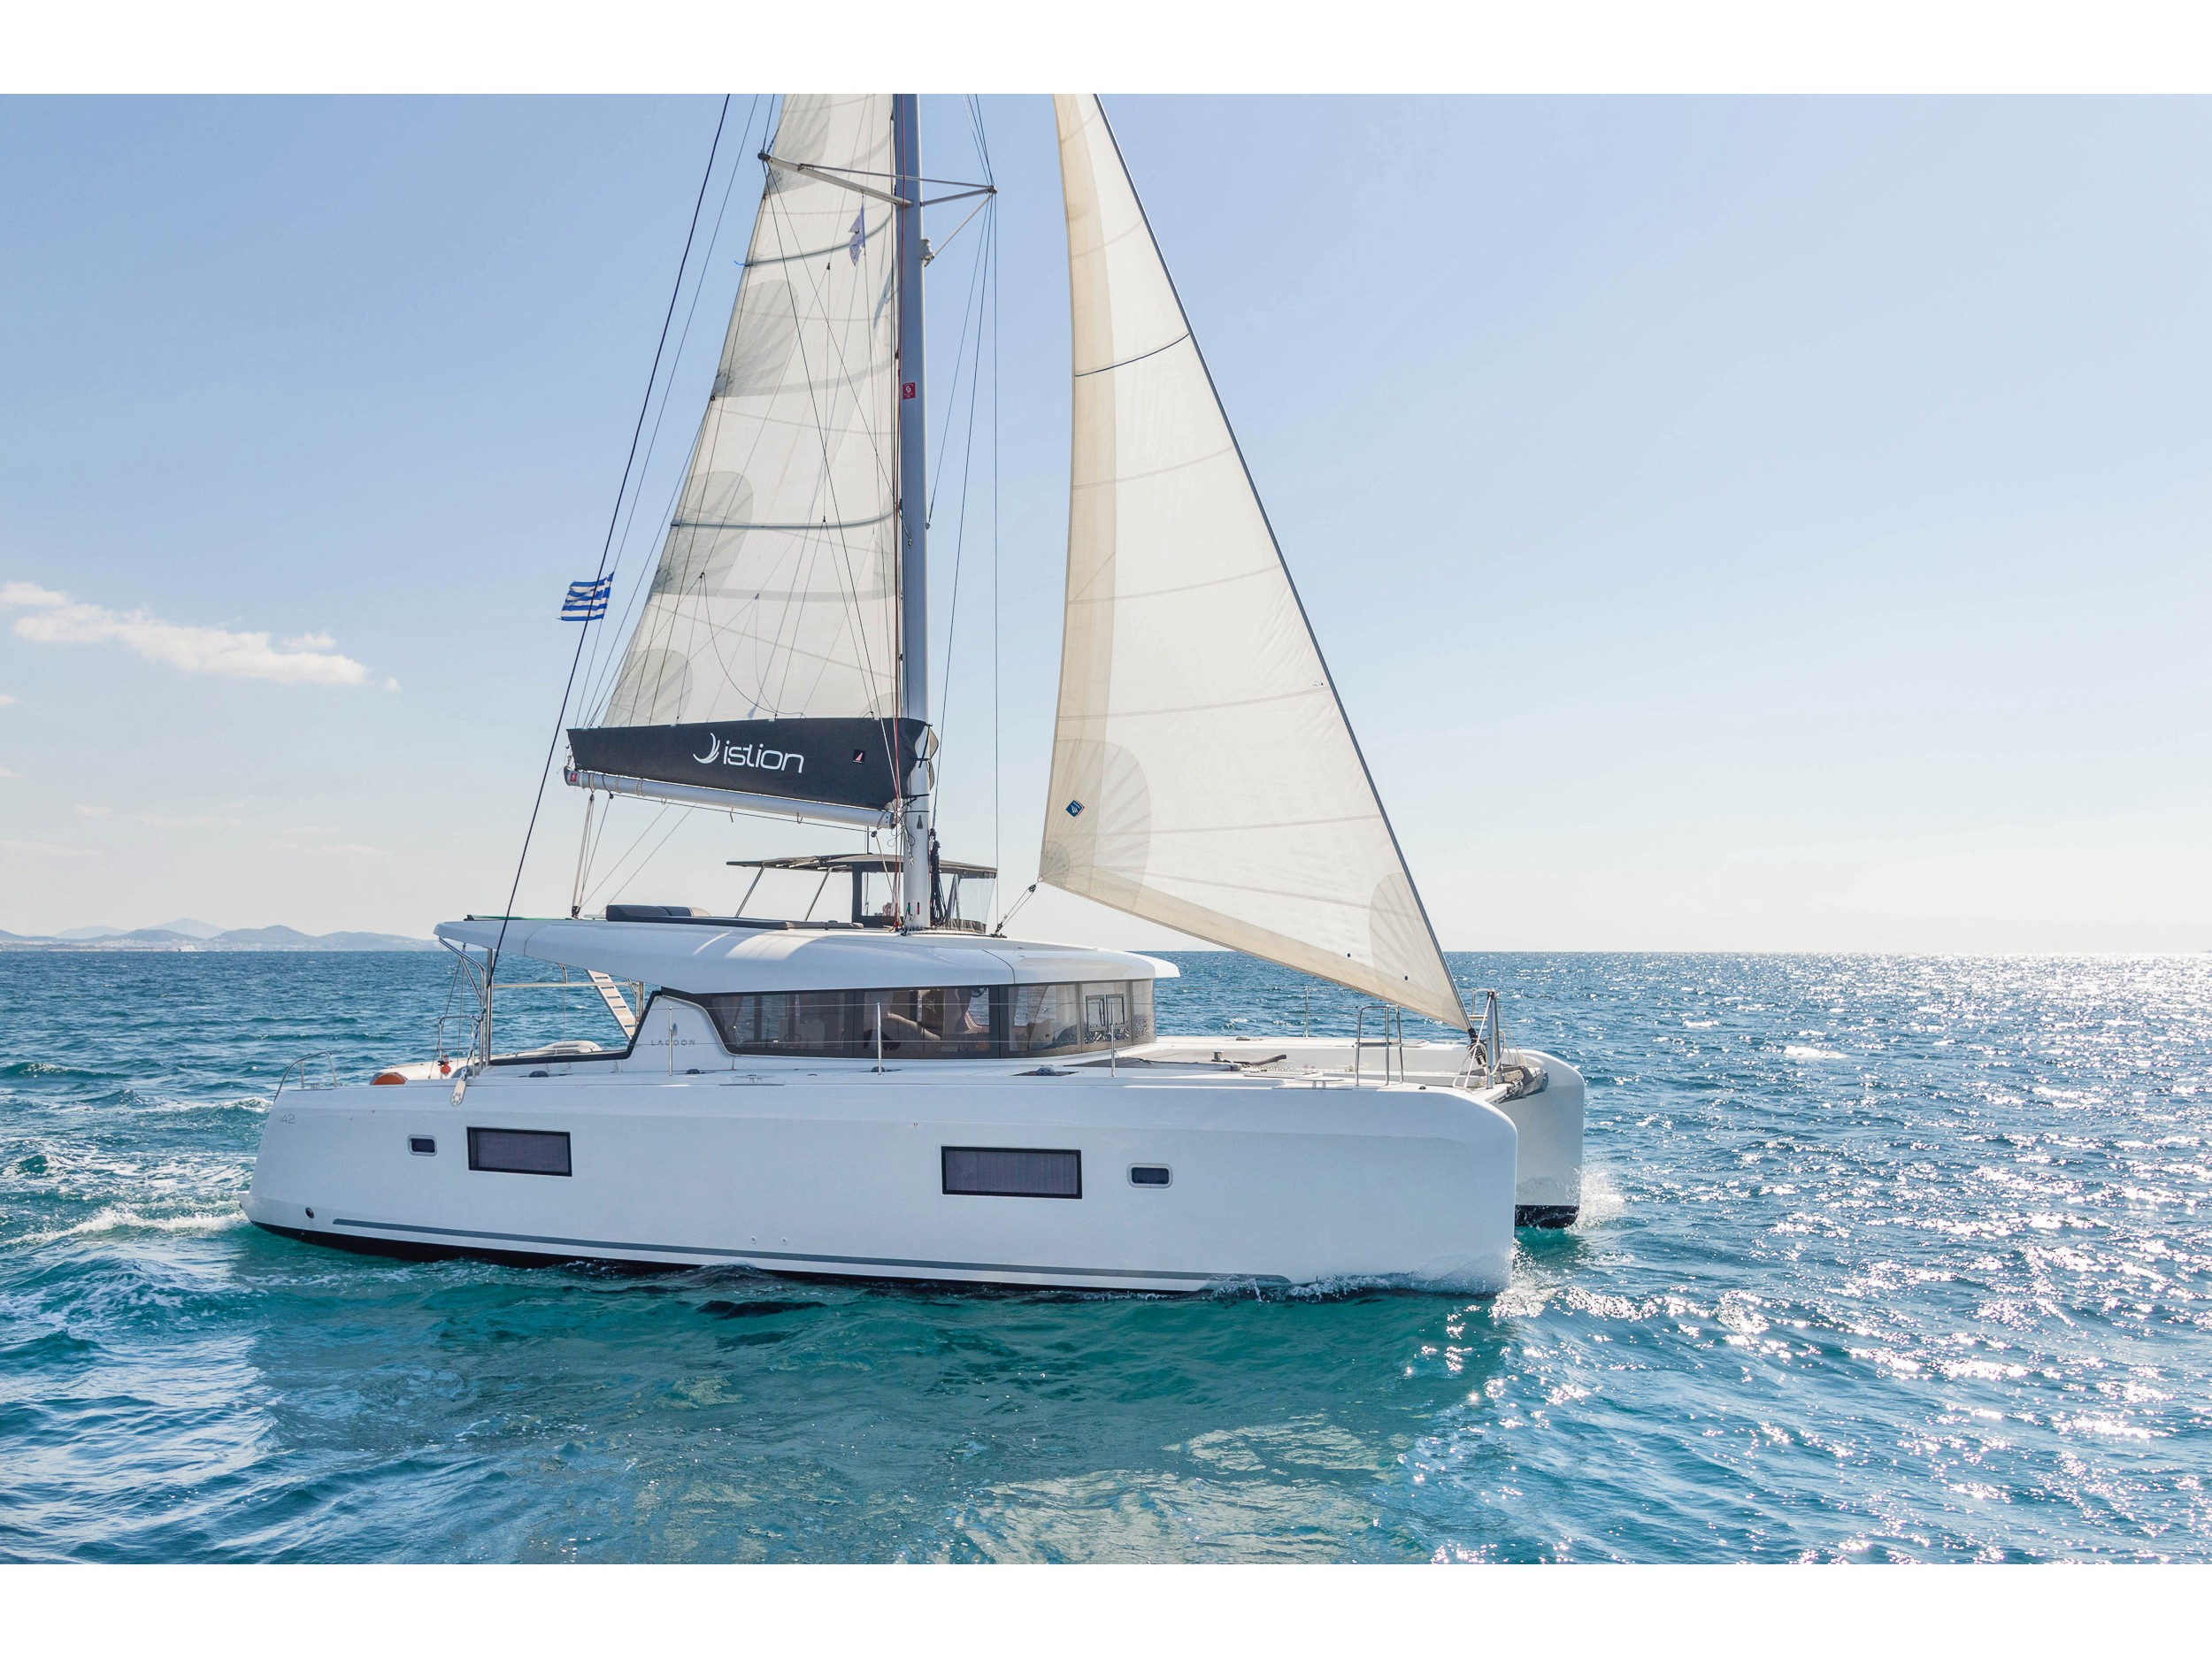 Lagoon 42 - Yacht Charter Lavrion & Boat hire in Greece Athens and Saronic Gulf Lavrion Lavrion Main Port 3